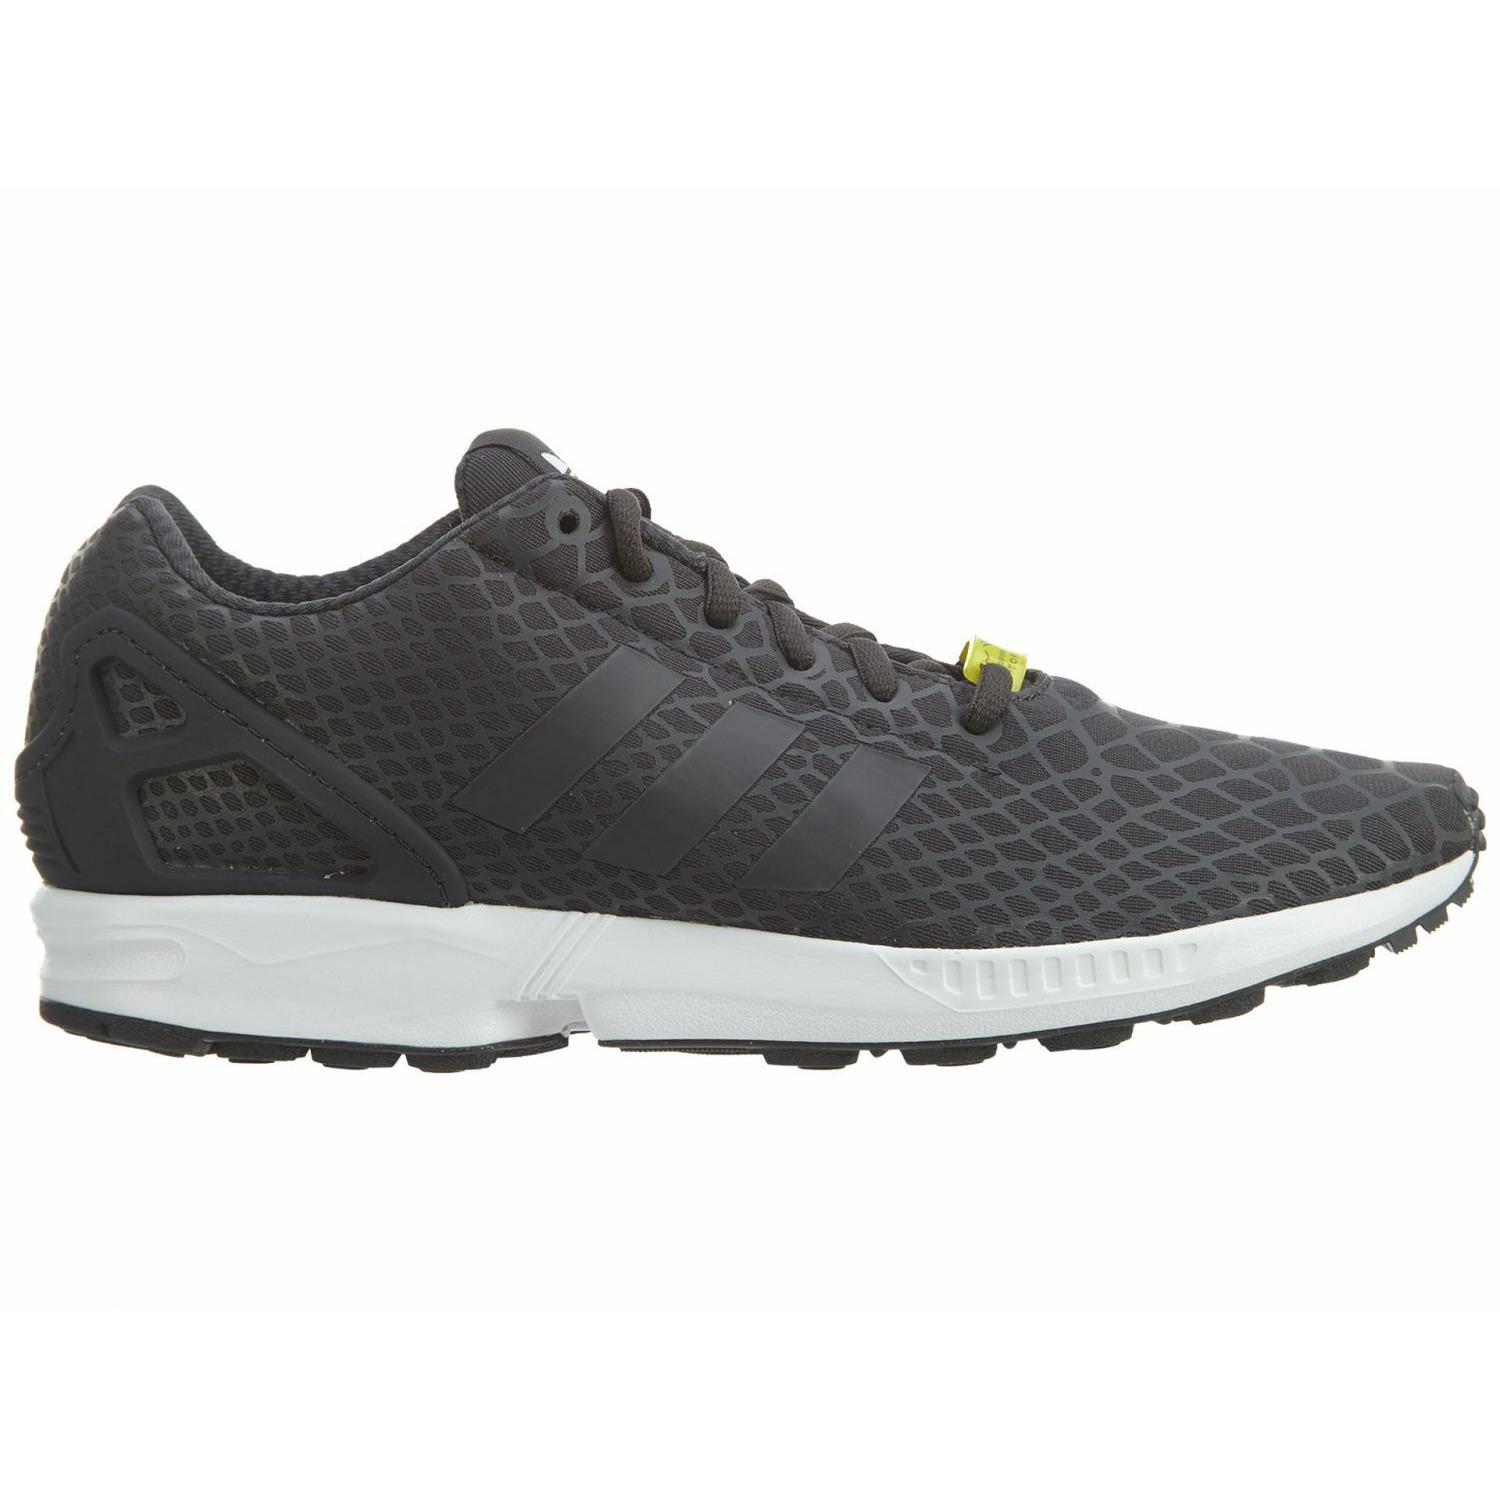 Adidas ZX Flux Techfit Mens S75488 Shadow Black White Running Shoes Size 9.5 - Shadow Black/White